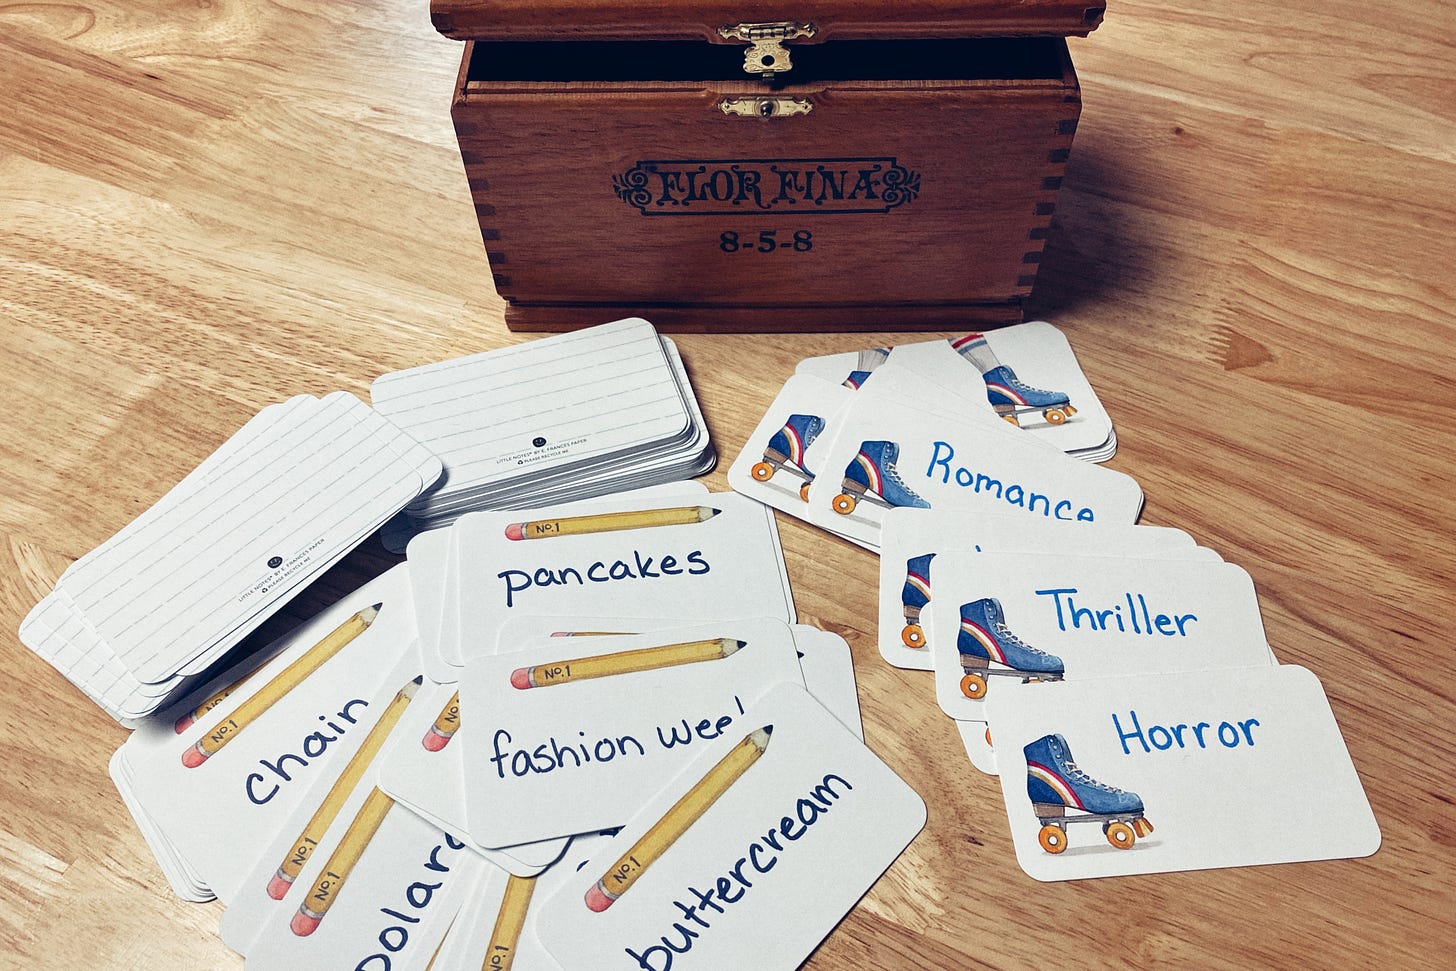 A bunch of cards with words written on them, spread out on a light wood table, with a cherry wood cigar box cracked open behind them. The cards on the left read "pancakes, fashion week, buttercream" with a few more only partially visable and two stacks of cards behind them. The cards on the right read "romance, thriller, horror" with a few more piled underneath them.